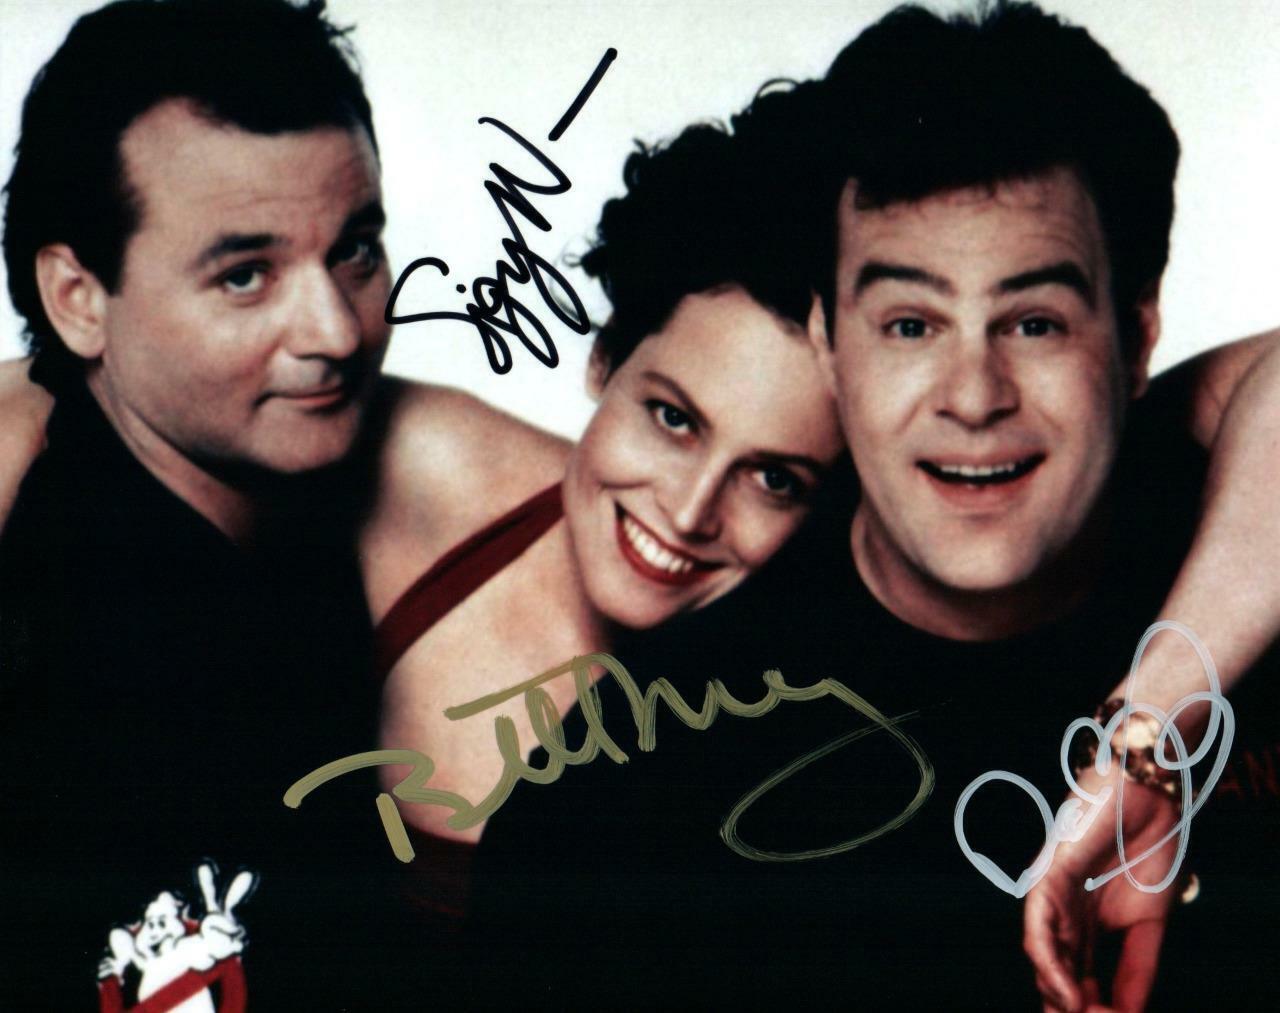 Bill Murray Dan Aykroyd Weaver signed 8x10 Photo Poster painting Pic autographed Picture and COA